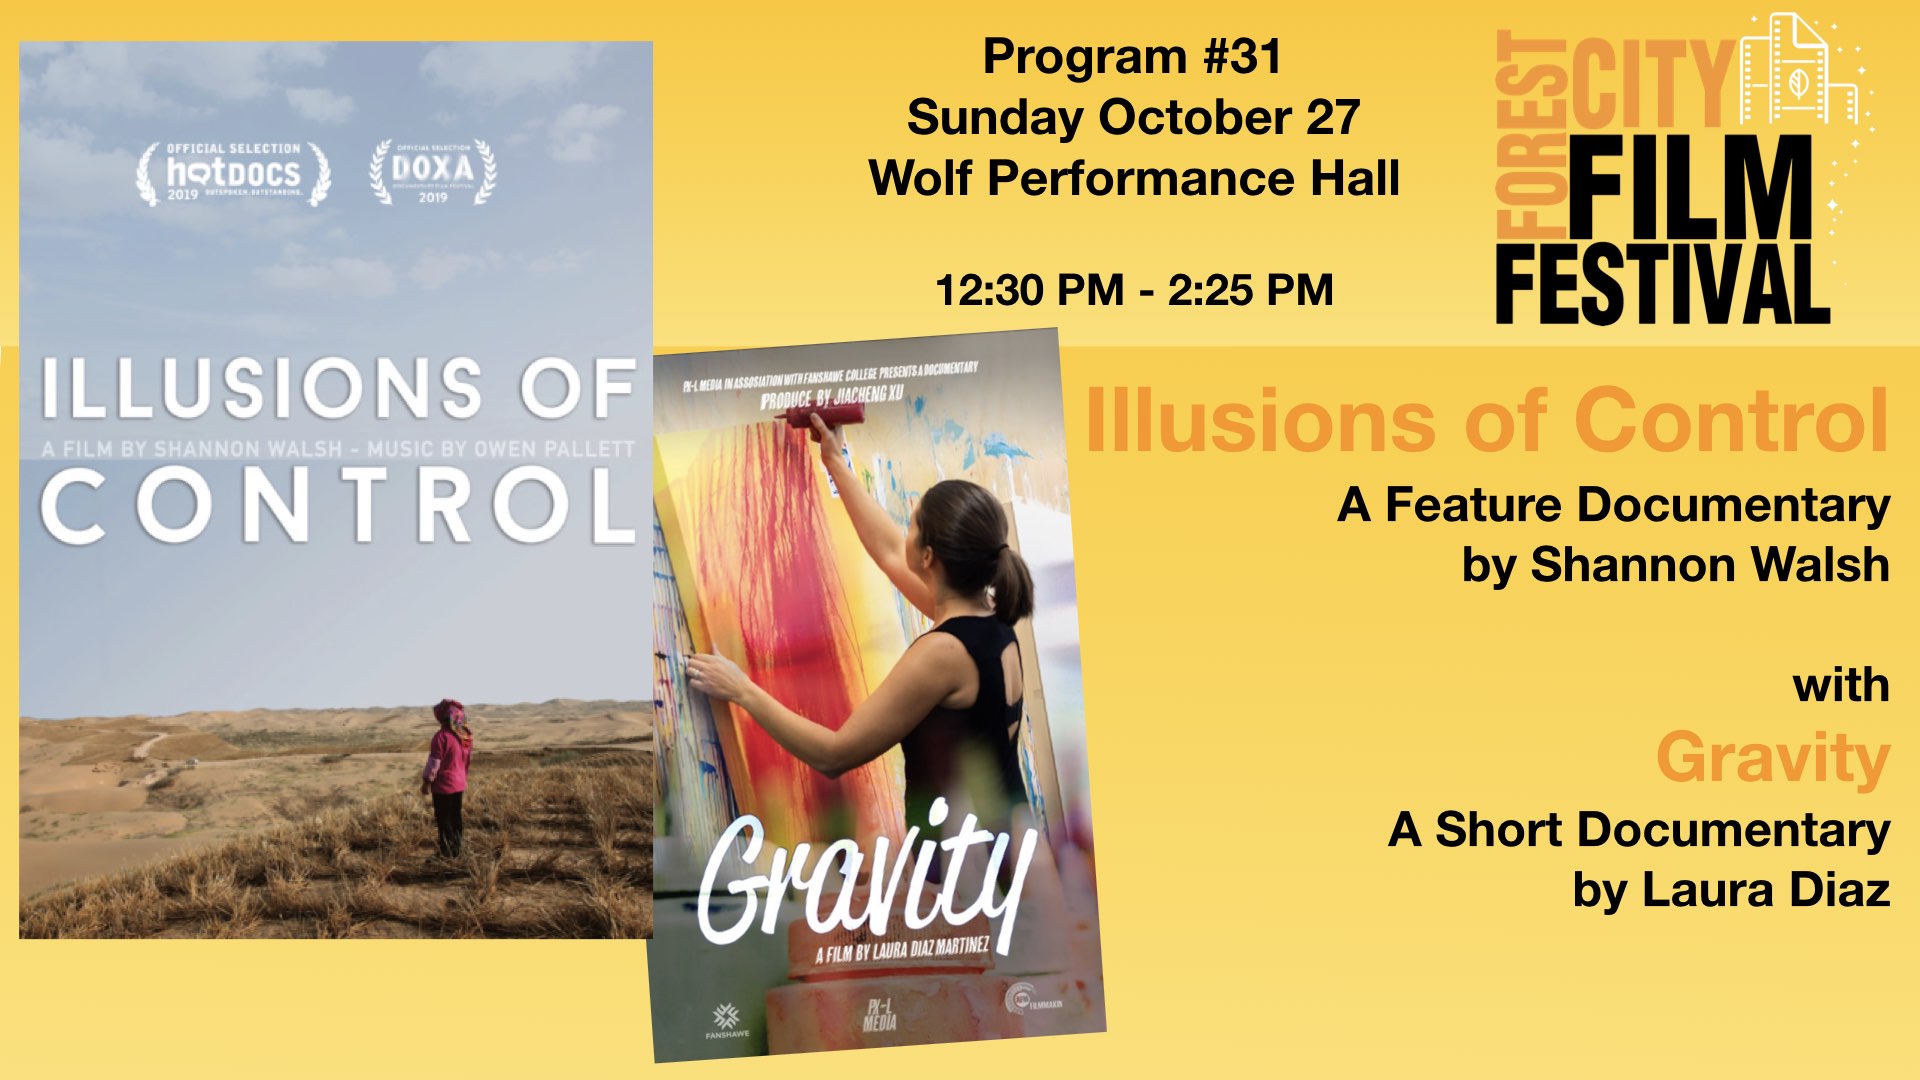 FCFF 2019 - Sunday Early Afternoon at Wolf, Program #31 - Illusions of Control and Gravity